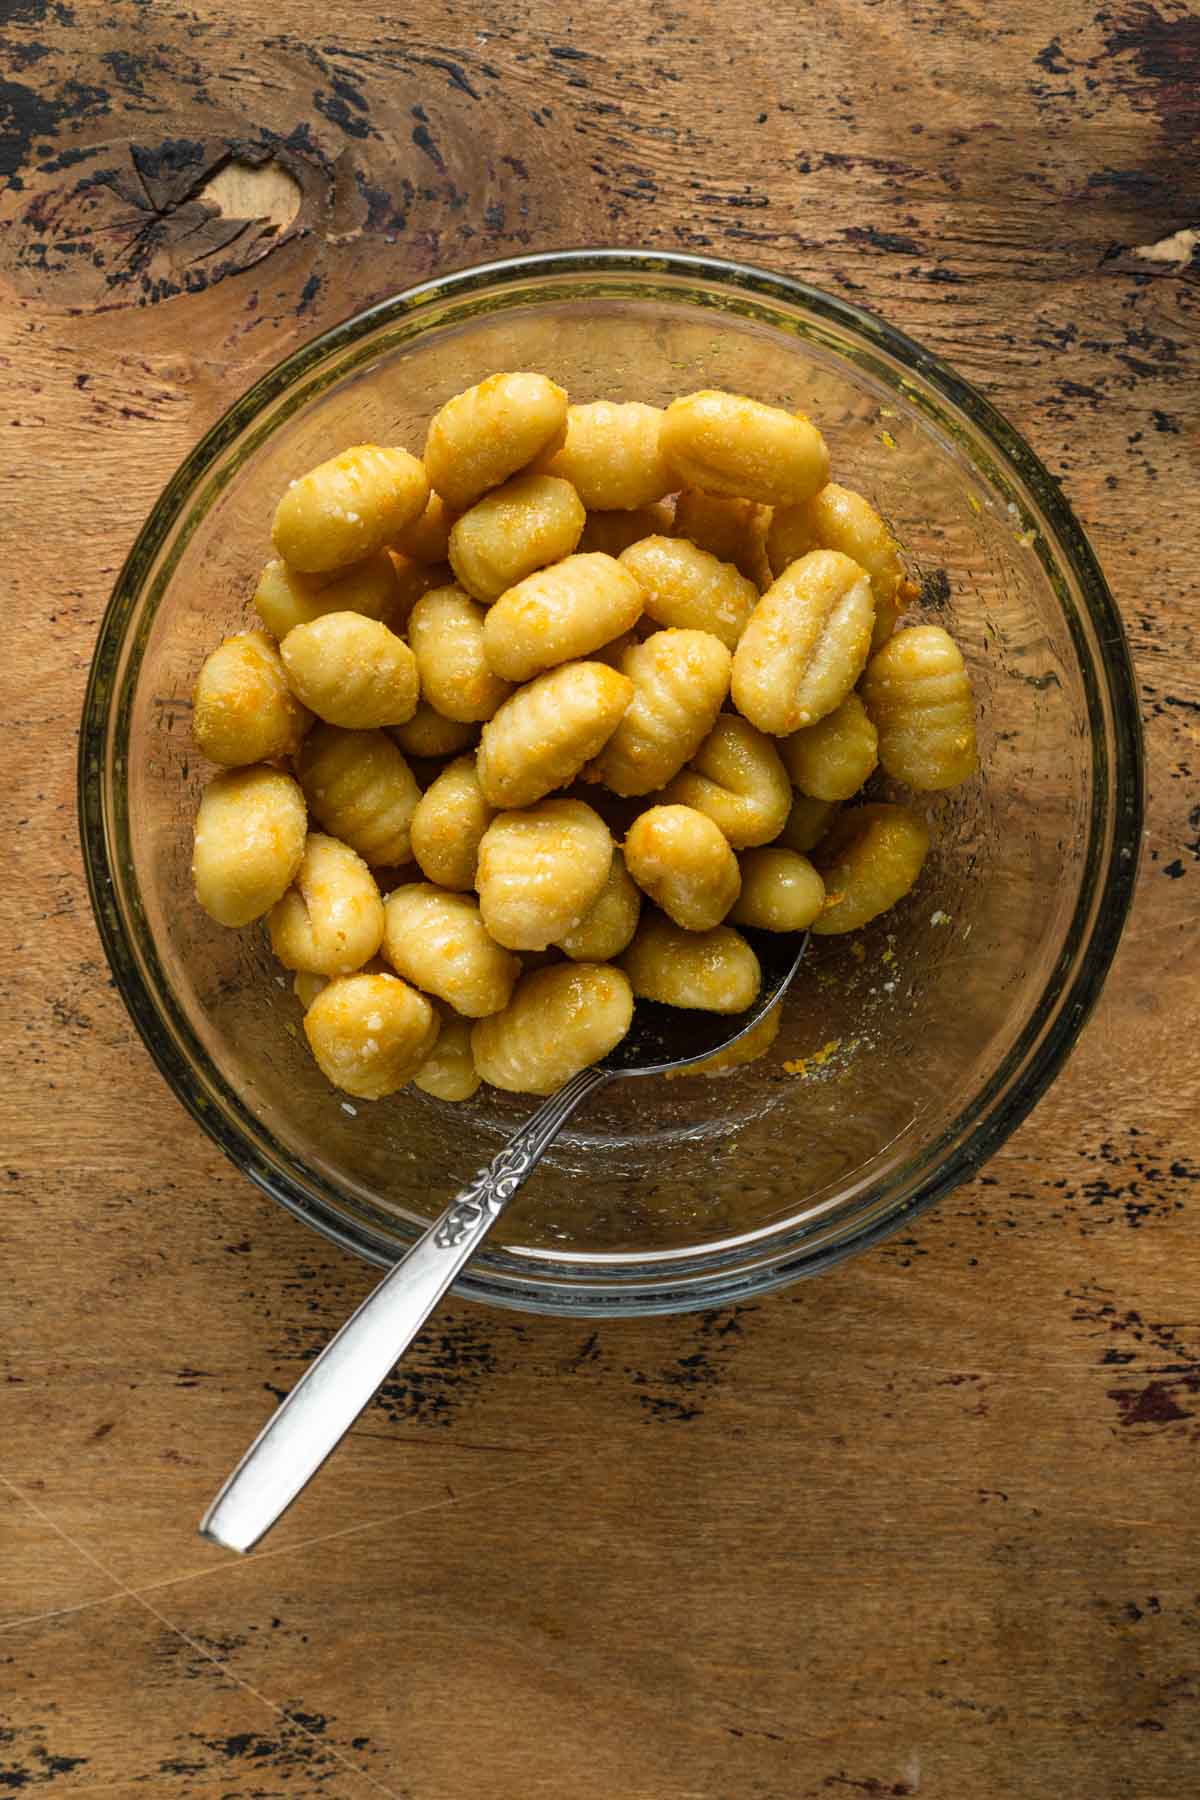 Seasoned gnocchi in a glass bowl with a spoon.